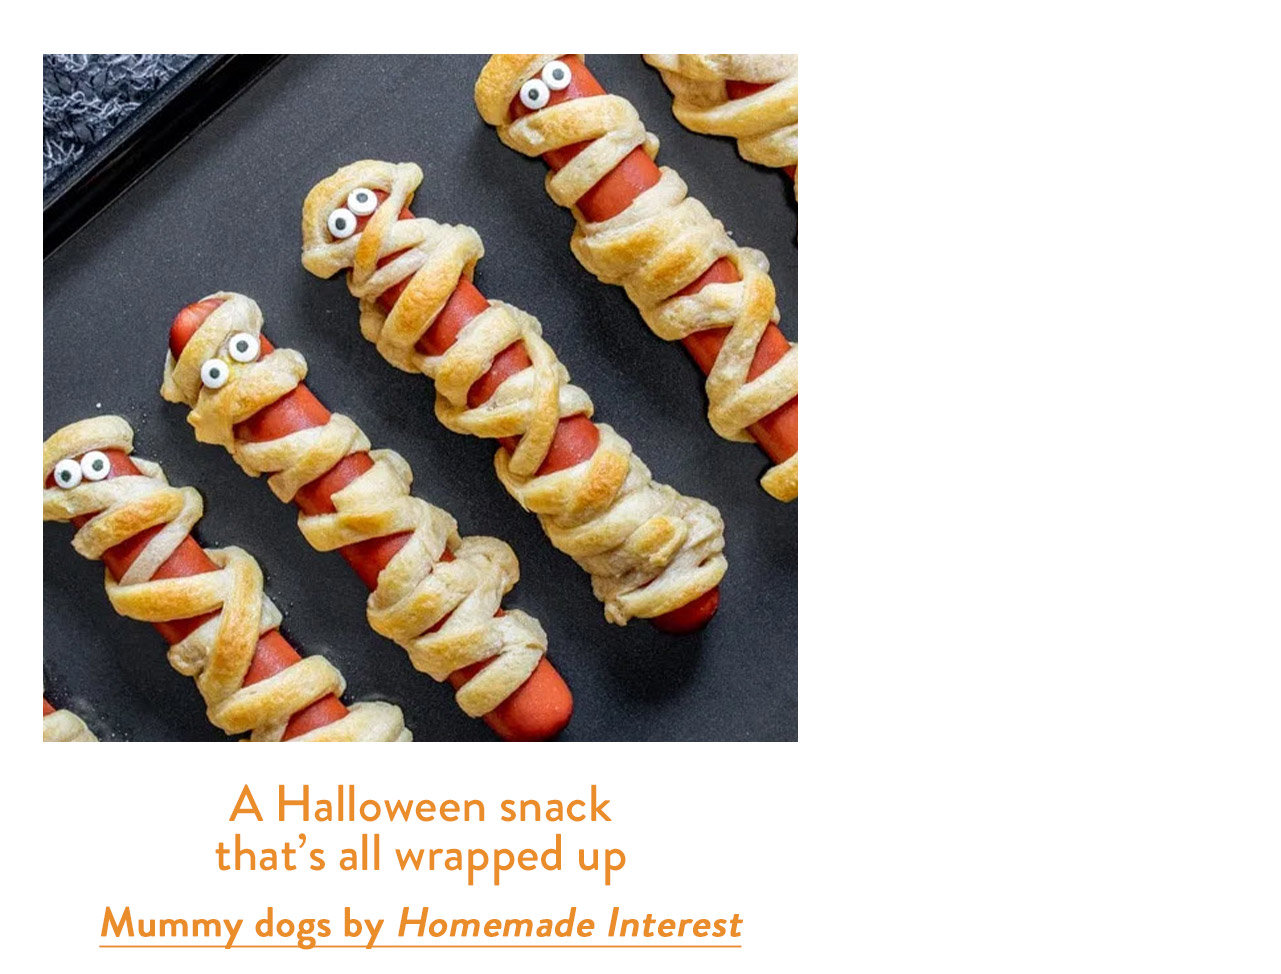 Mummy dogs by Homemade Interest